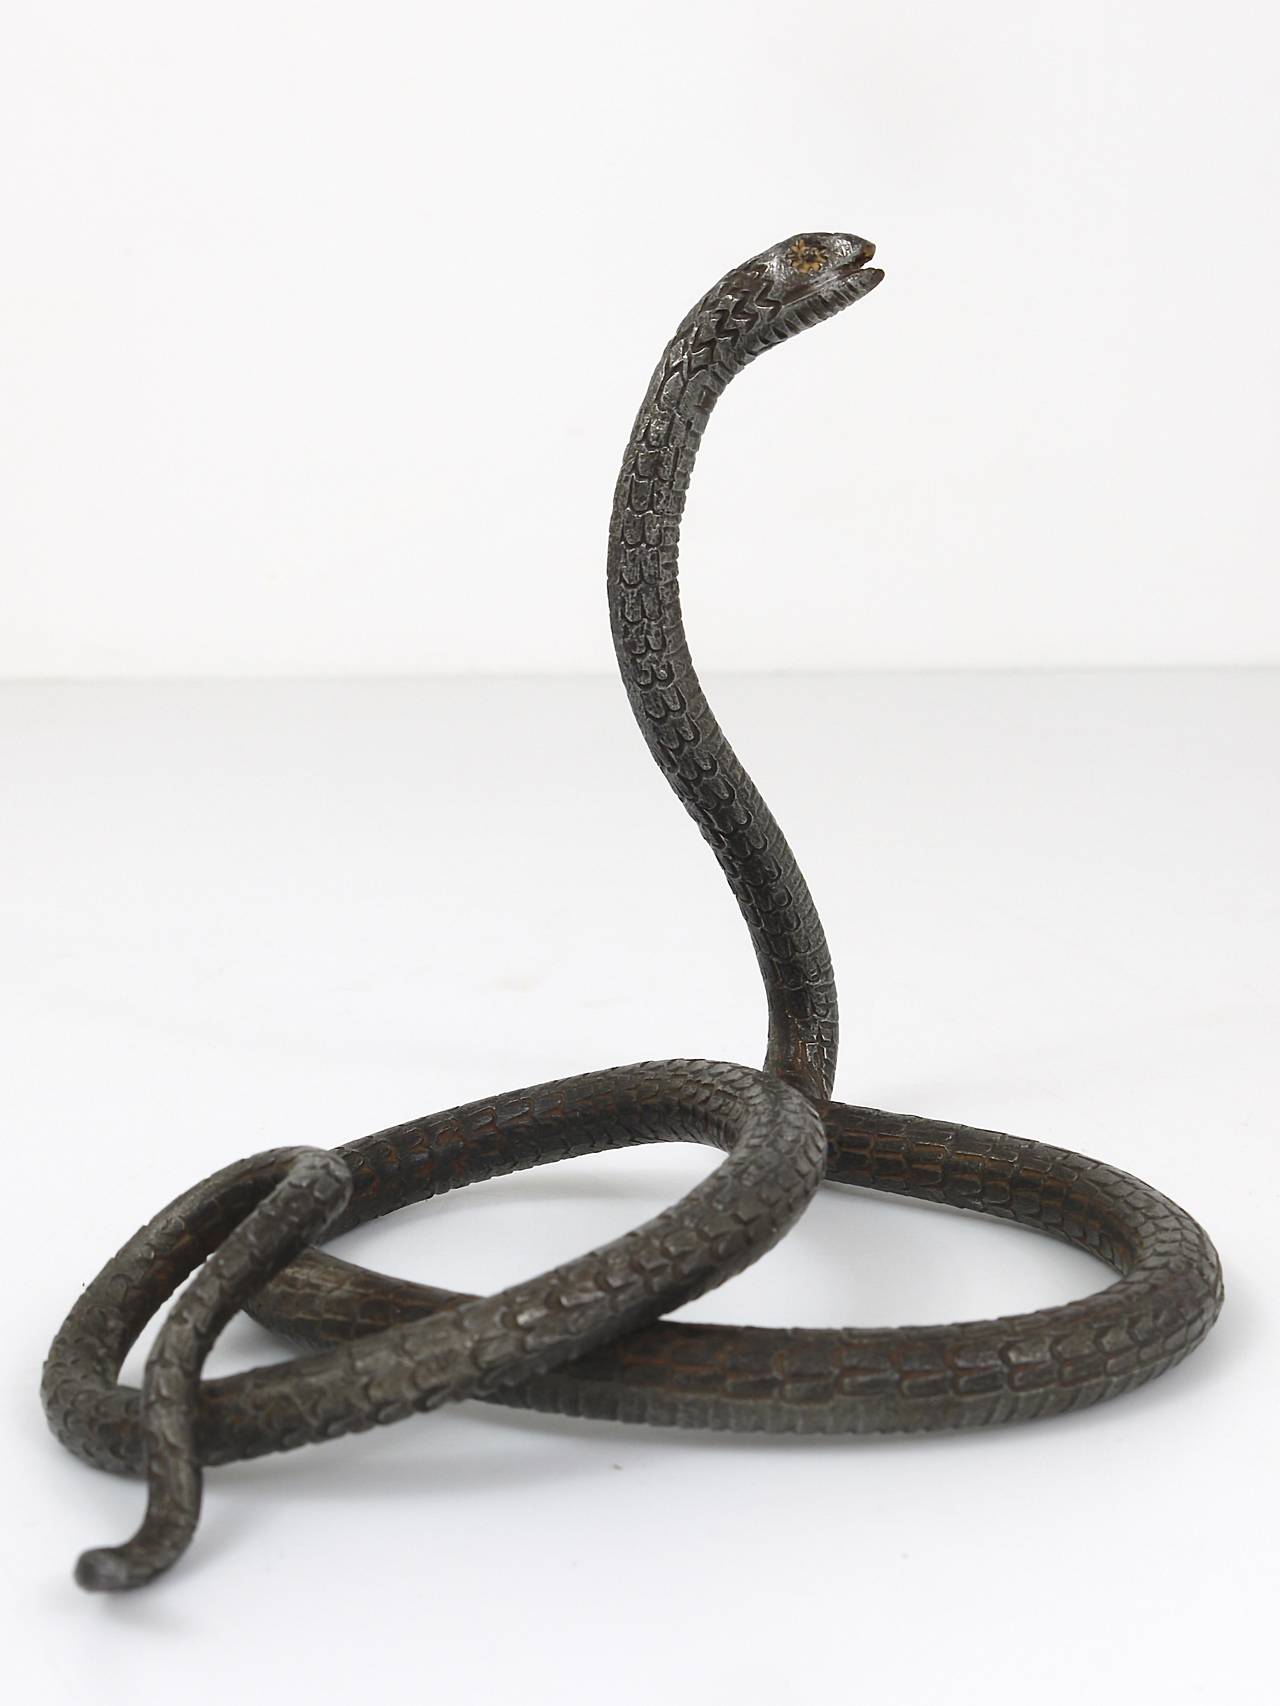 A Hand-Forged Iron Model Of A Snake, Snake Sculpture, Vienna, 1920s ...